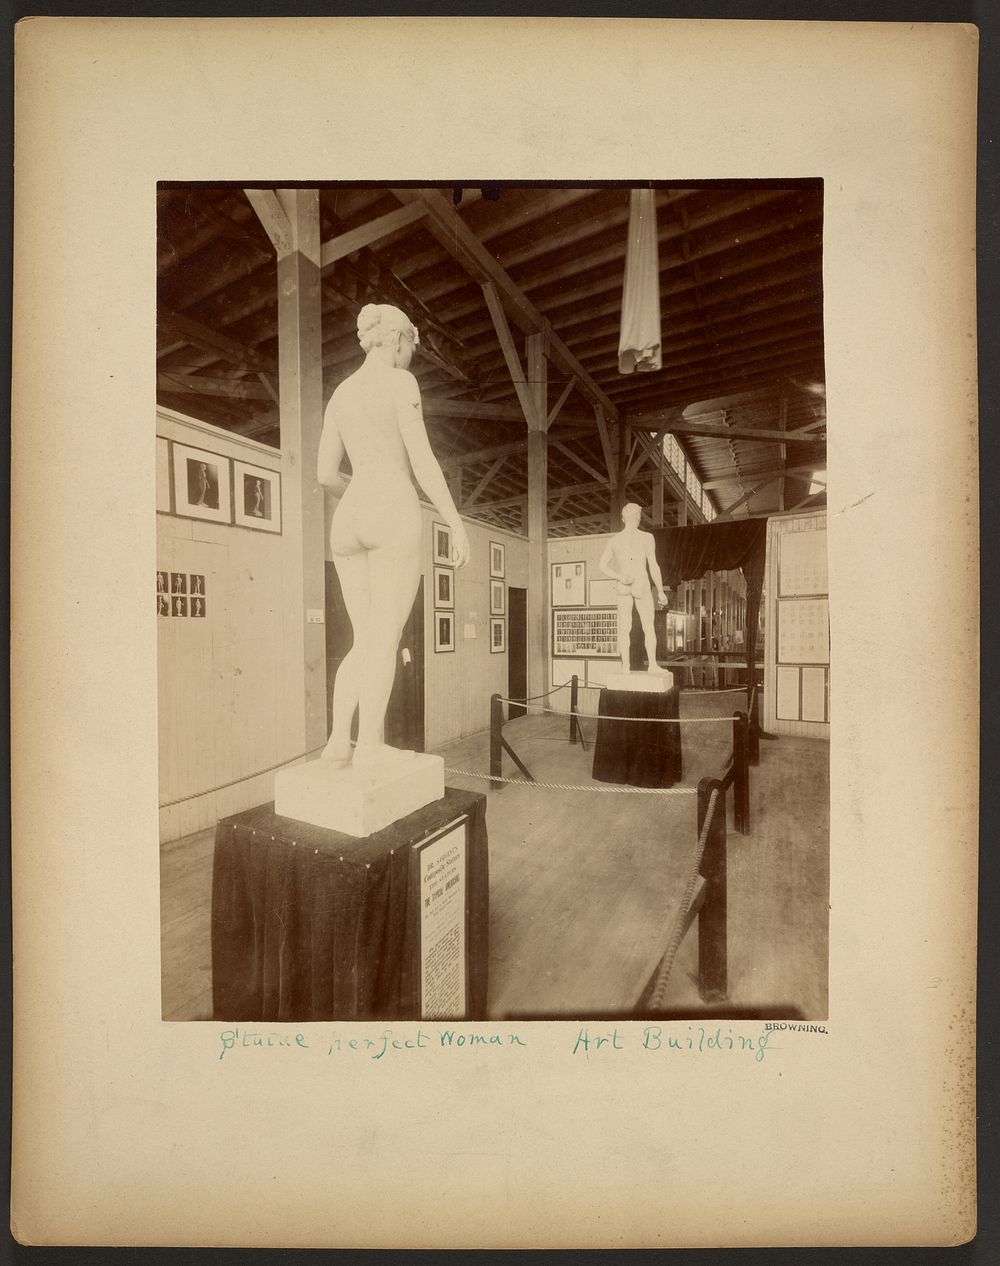 Statue, Perfect Woman, Art Building by Browning